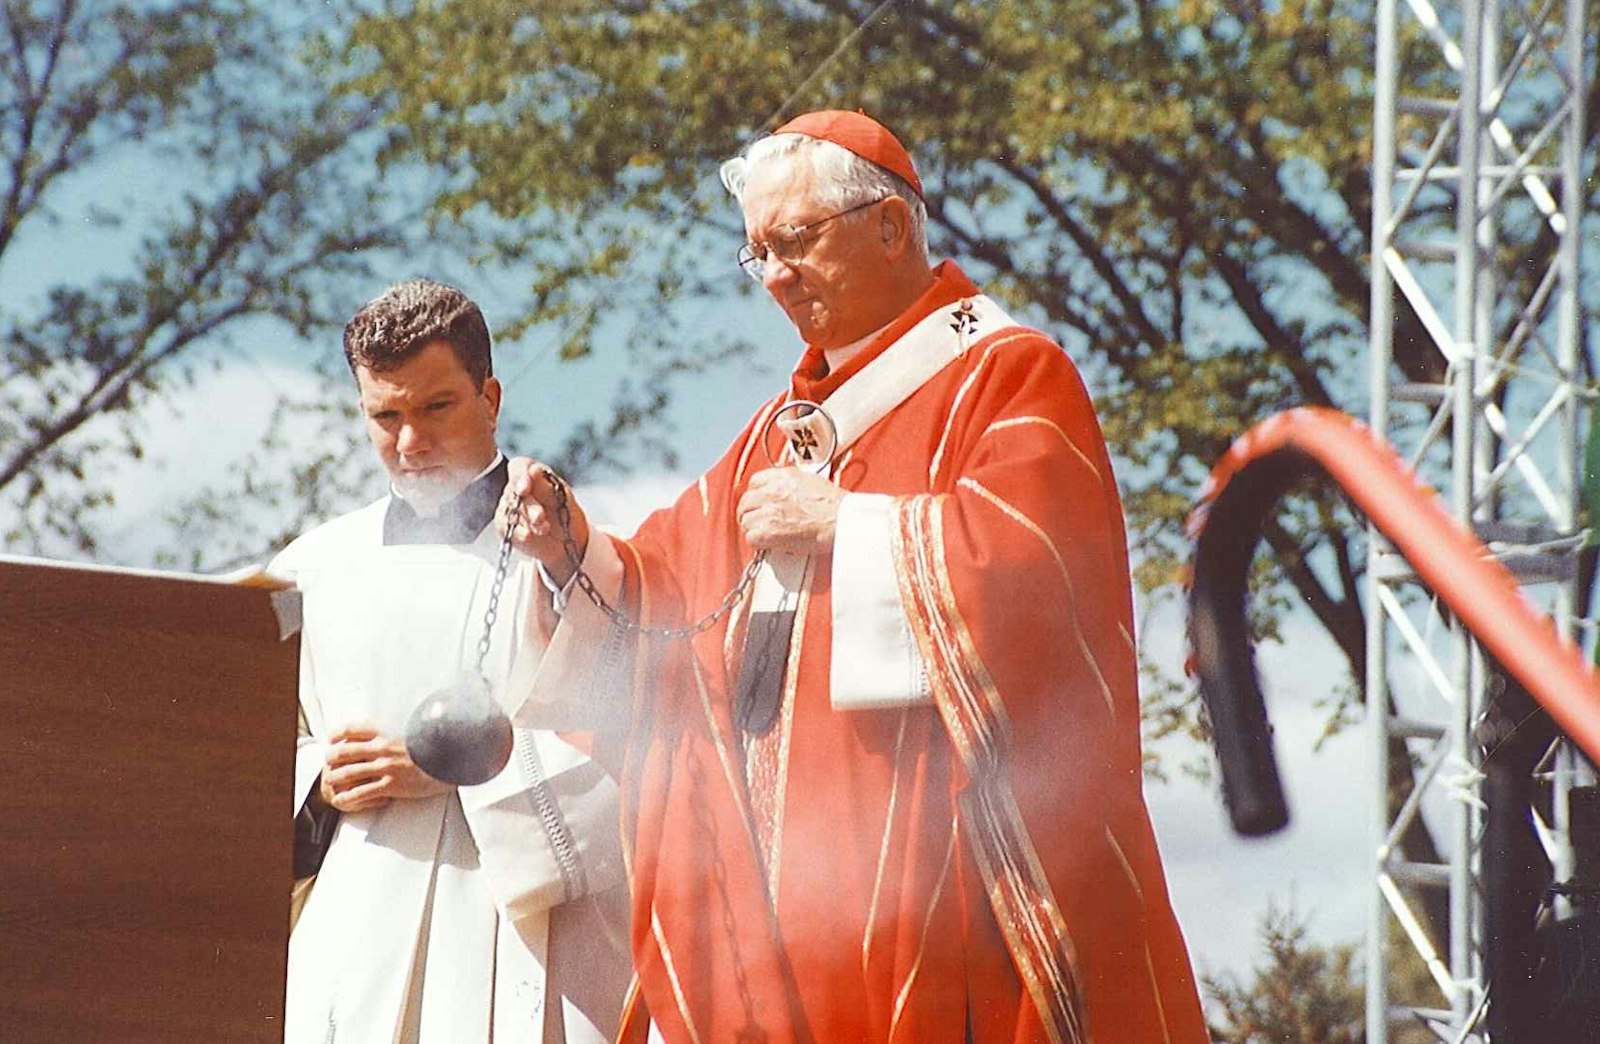 Detroit Cardinal Adam J. Maida celebrates an outdoor Mass at St. John's Center in Plymouth during a Eucharistic Congress in 2000 as then-Fr. Jeffrey M. Monforton, left, assists. Bishop Monforton spent seven years serving as Cardinal Maida's personal priest-secretary from 1998 to 2005, learning the ins and outs of the Archdiocese of Detroit and absorbing valuable lessons about episcopal service. (Larry A. Peplin | Detroit Catholic file photo)